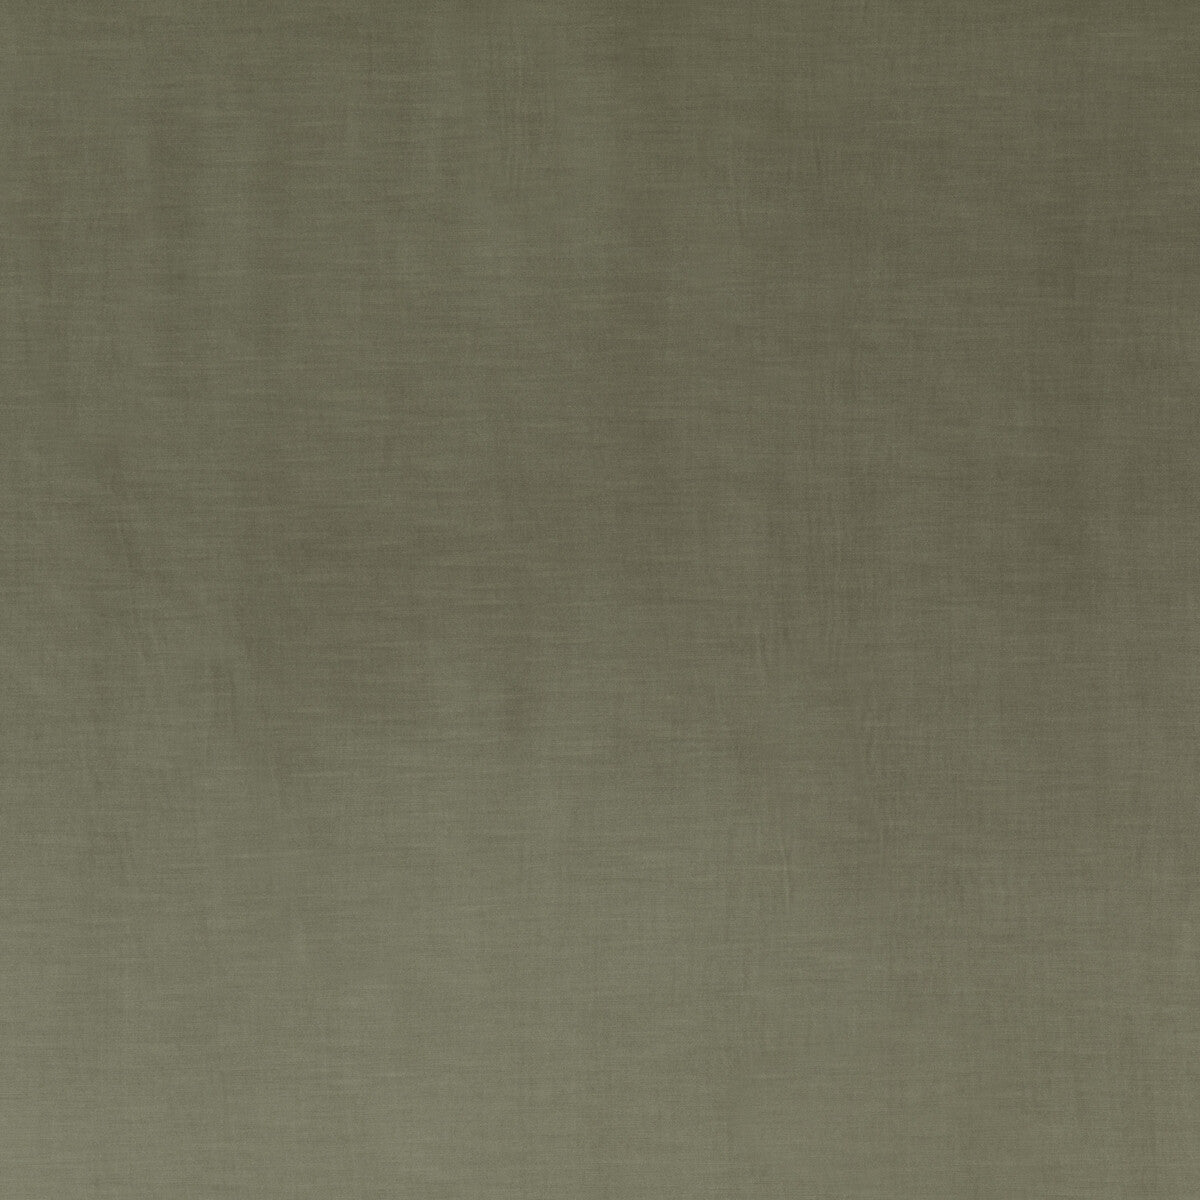 Coniston Velvet fabric in limestone color - pattern BF10781.140.0 - by G P &amp; J Baker in the Coniston Velvet collection